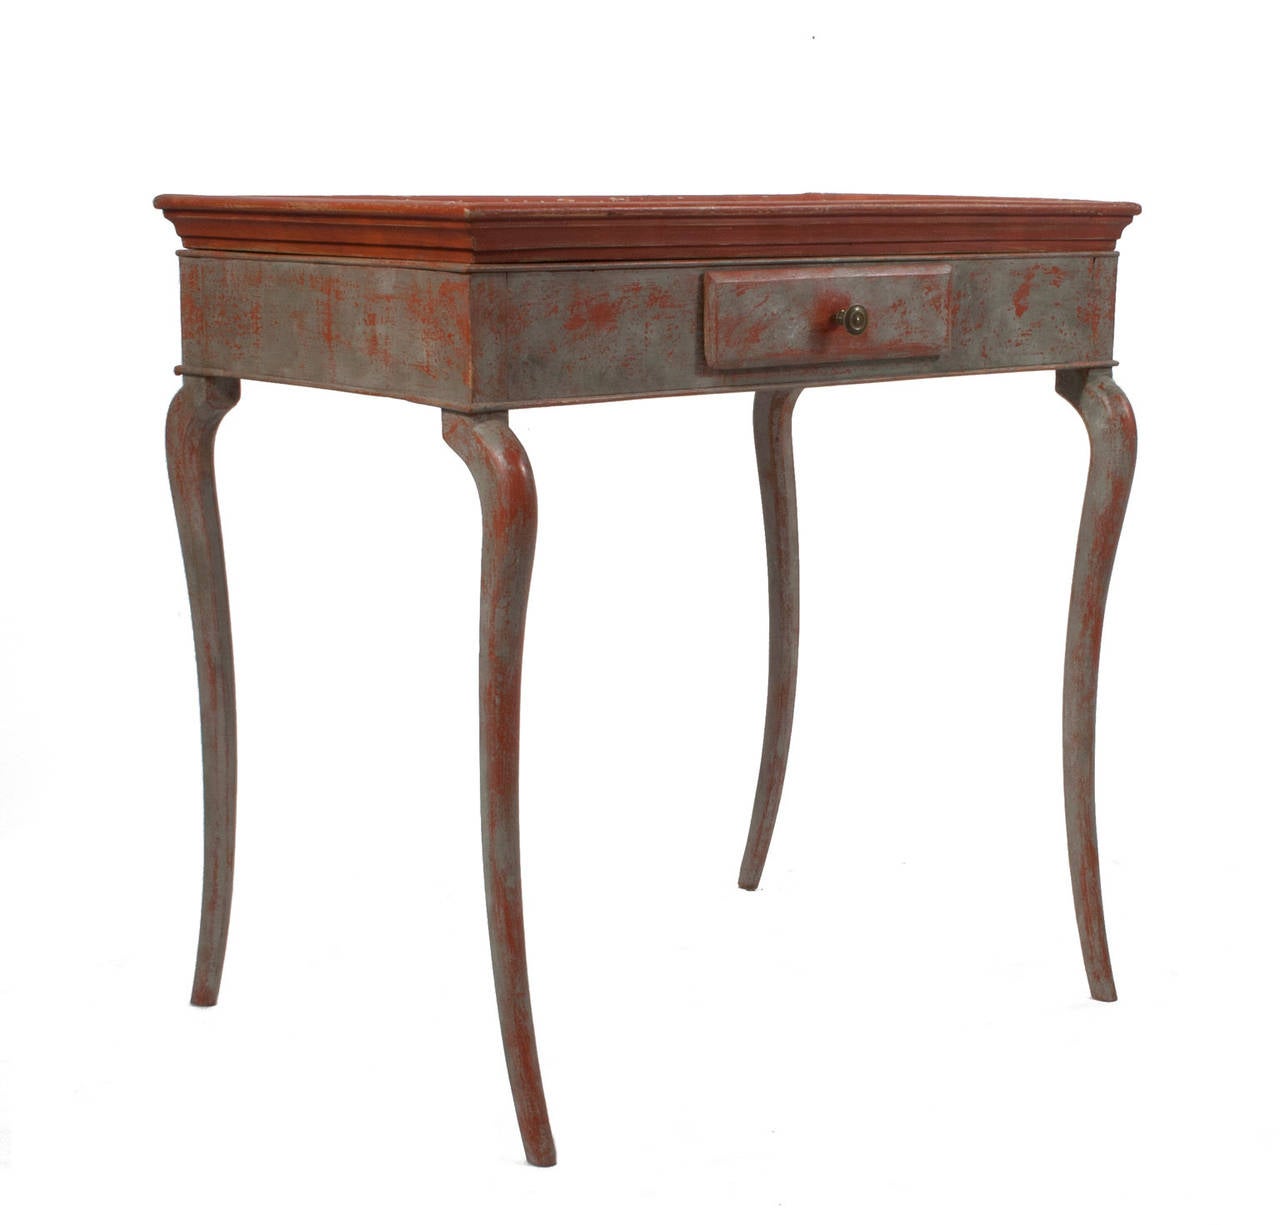 Rococo tray table in grey and red.